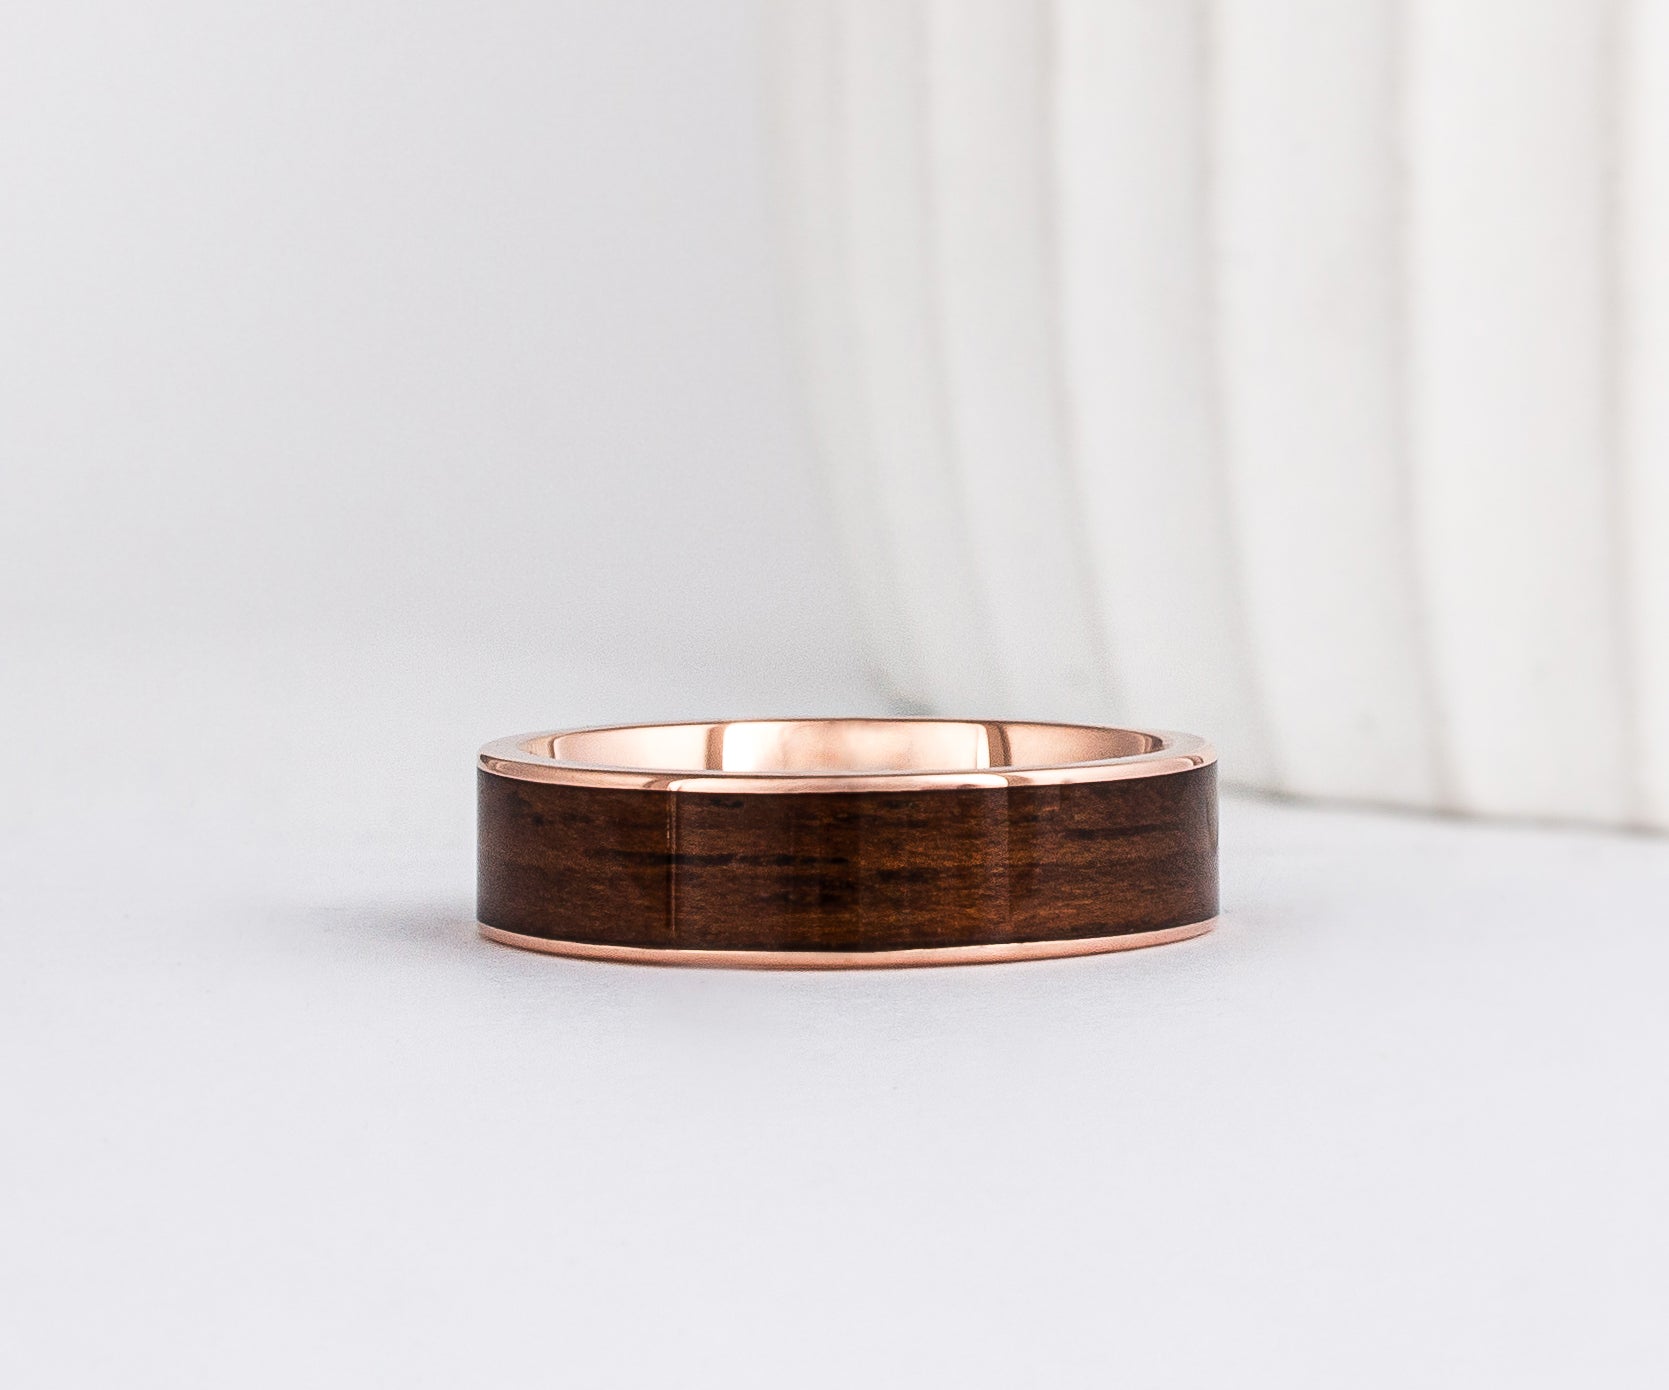 a 6mm gold and wood ring made with rose gold and english oak wood inlay